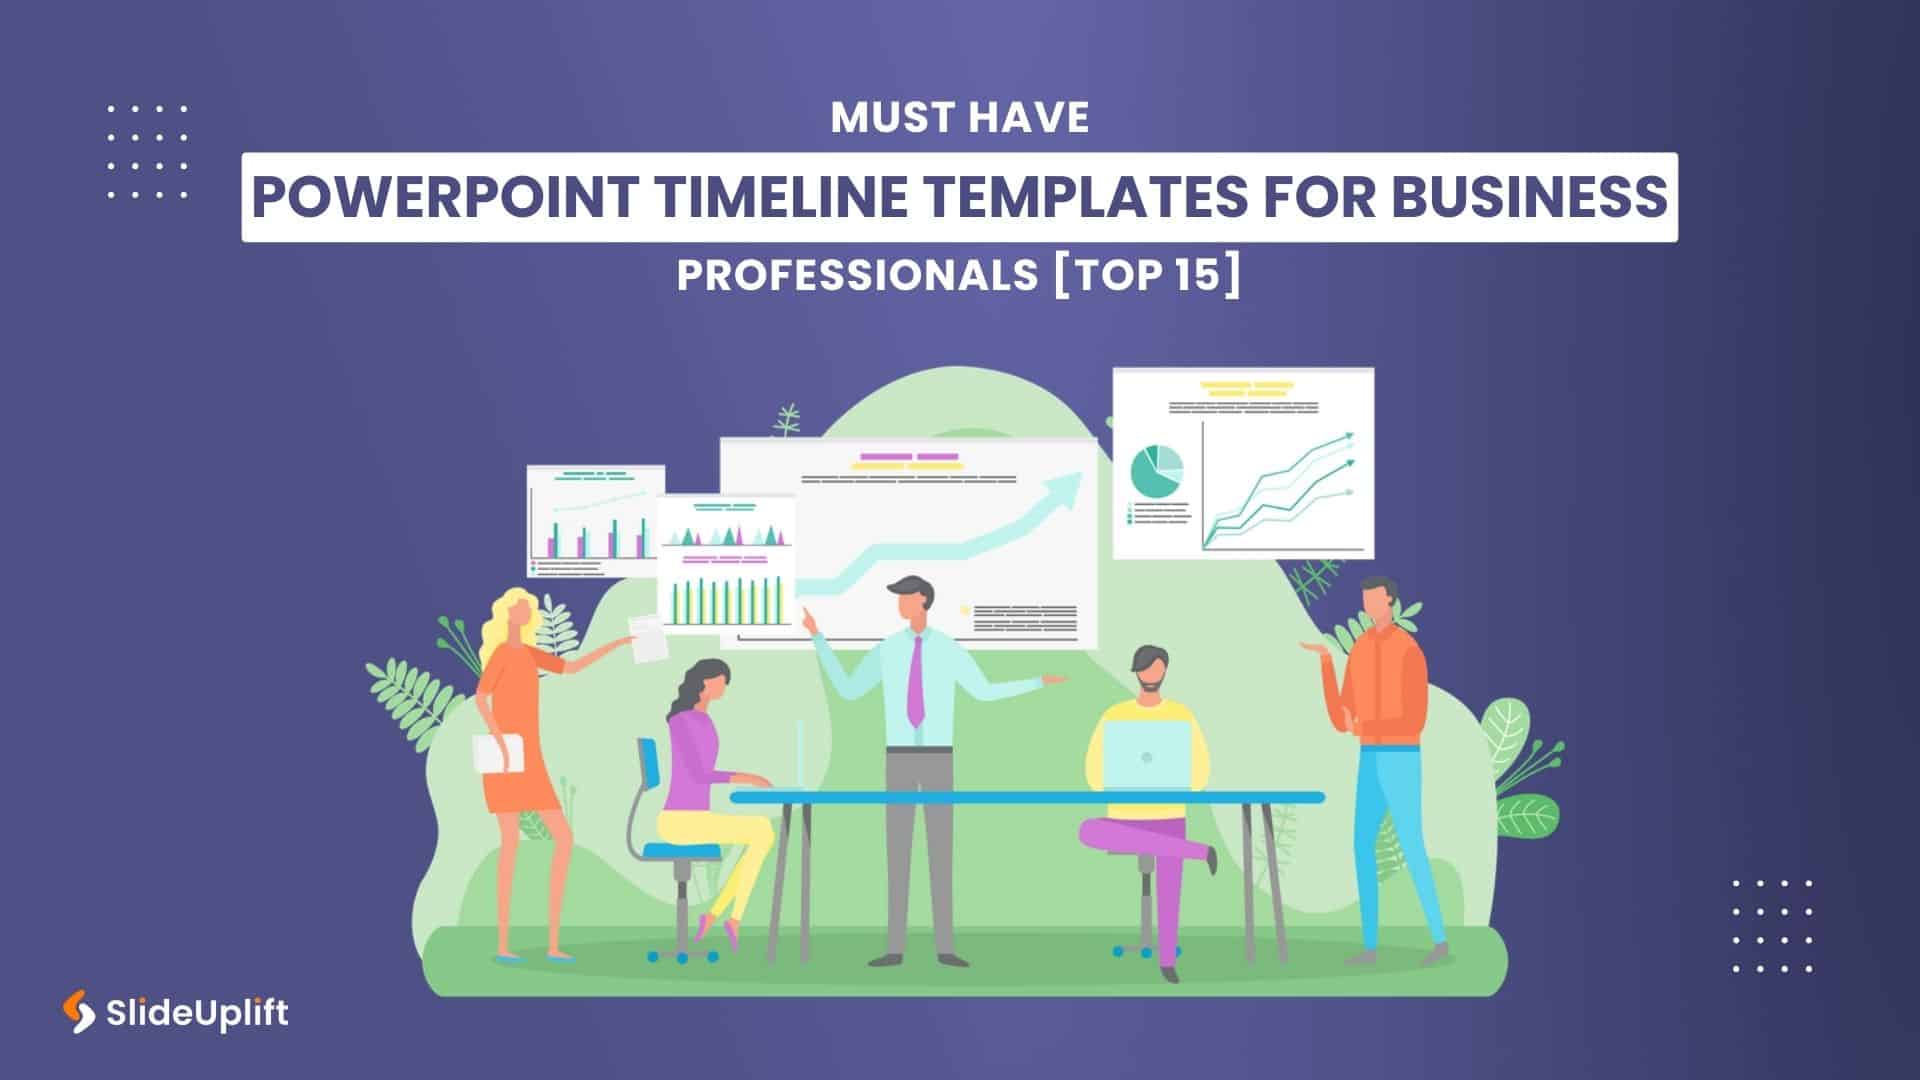 Must-Have PowerPoint Timeline Templates For Business Professionals [Top 15]